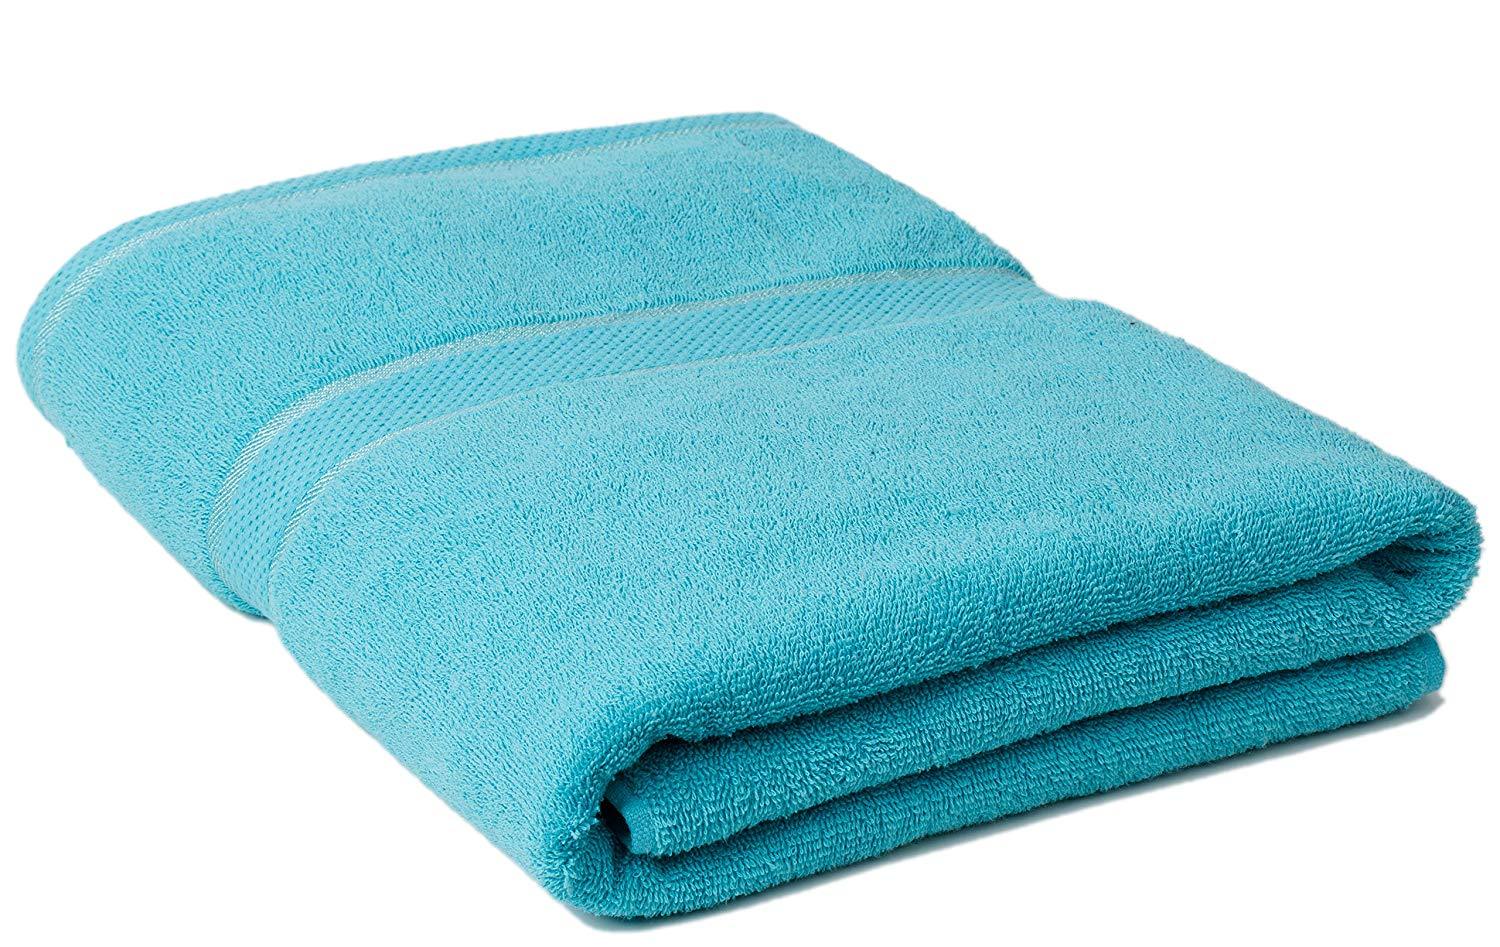 Classic Collection Premium 100% Organic Cotton Oversized Extra Large Bath Towels 34" X 60" Natural, Durable, Ultra-Absorbent,Luxurious Rayon Trim,Embroidery Decorative Set(2 Pack,Blue)